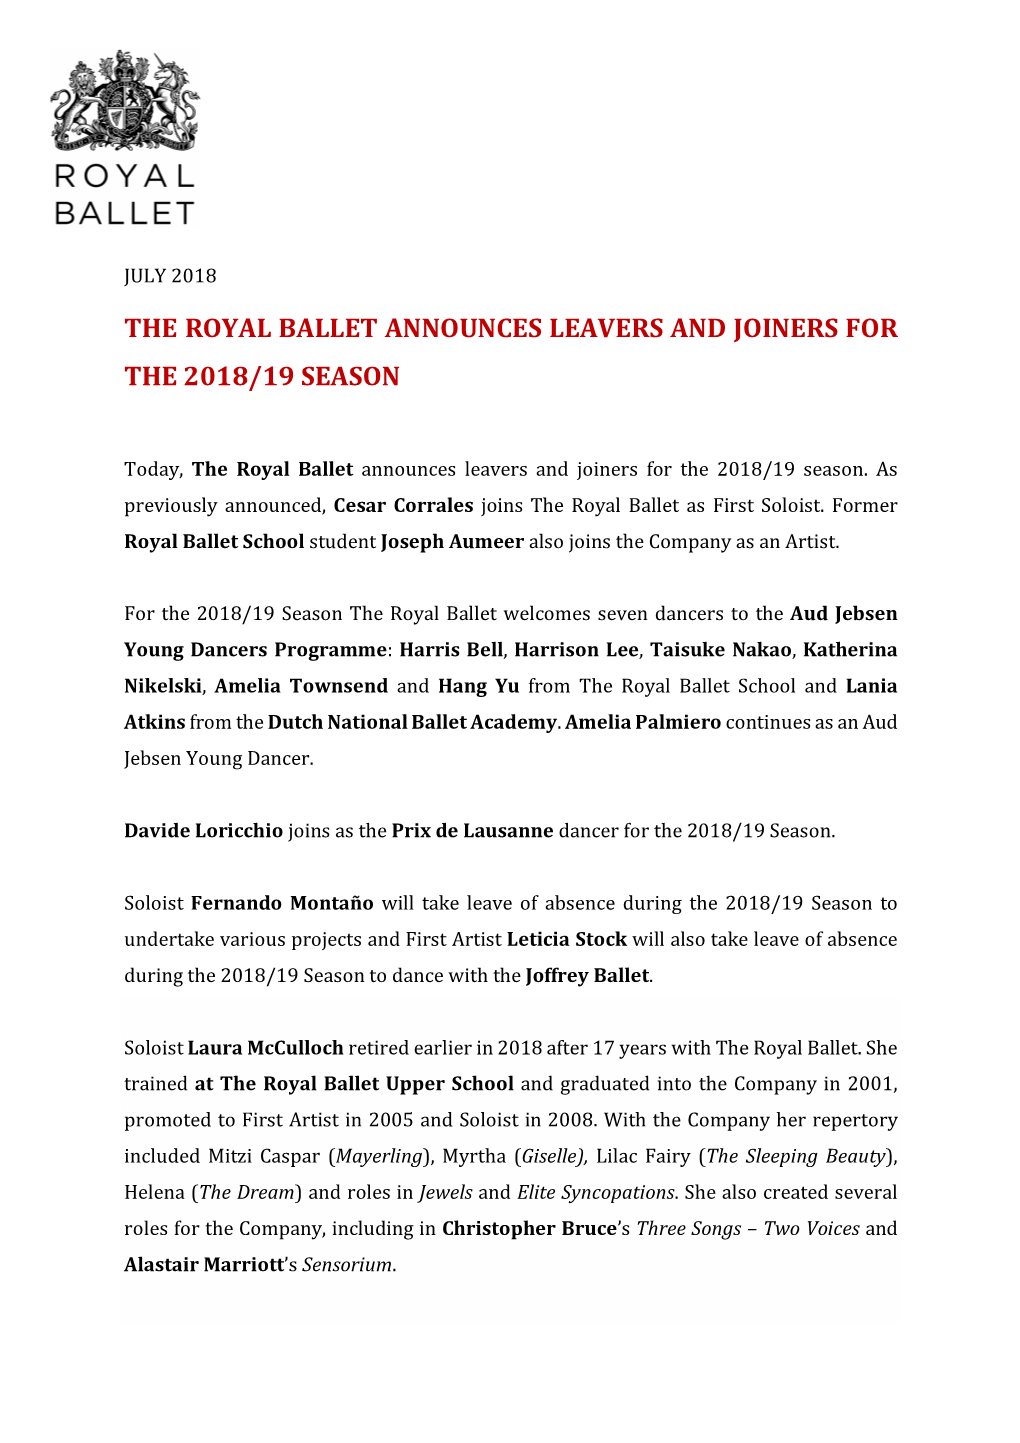 The Royal Ballet – Leavers and Joiners 2018/19